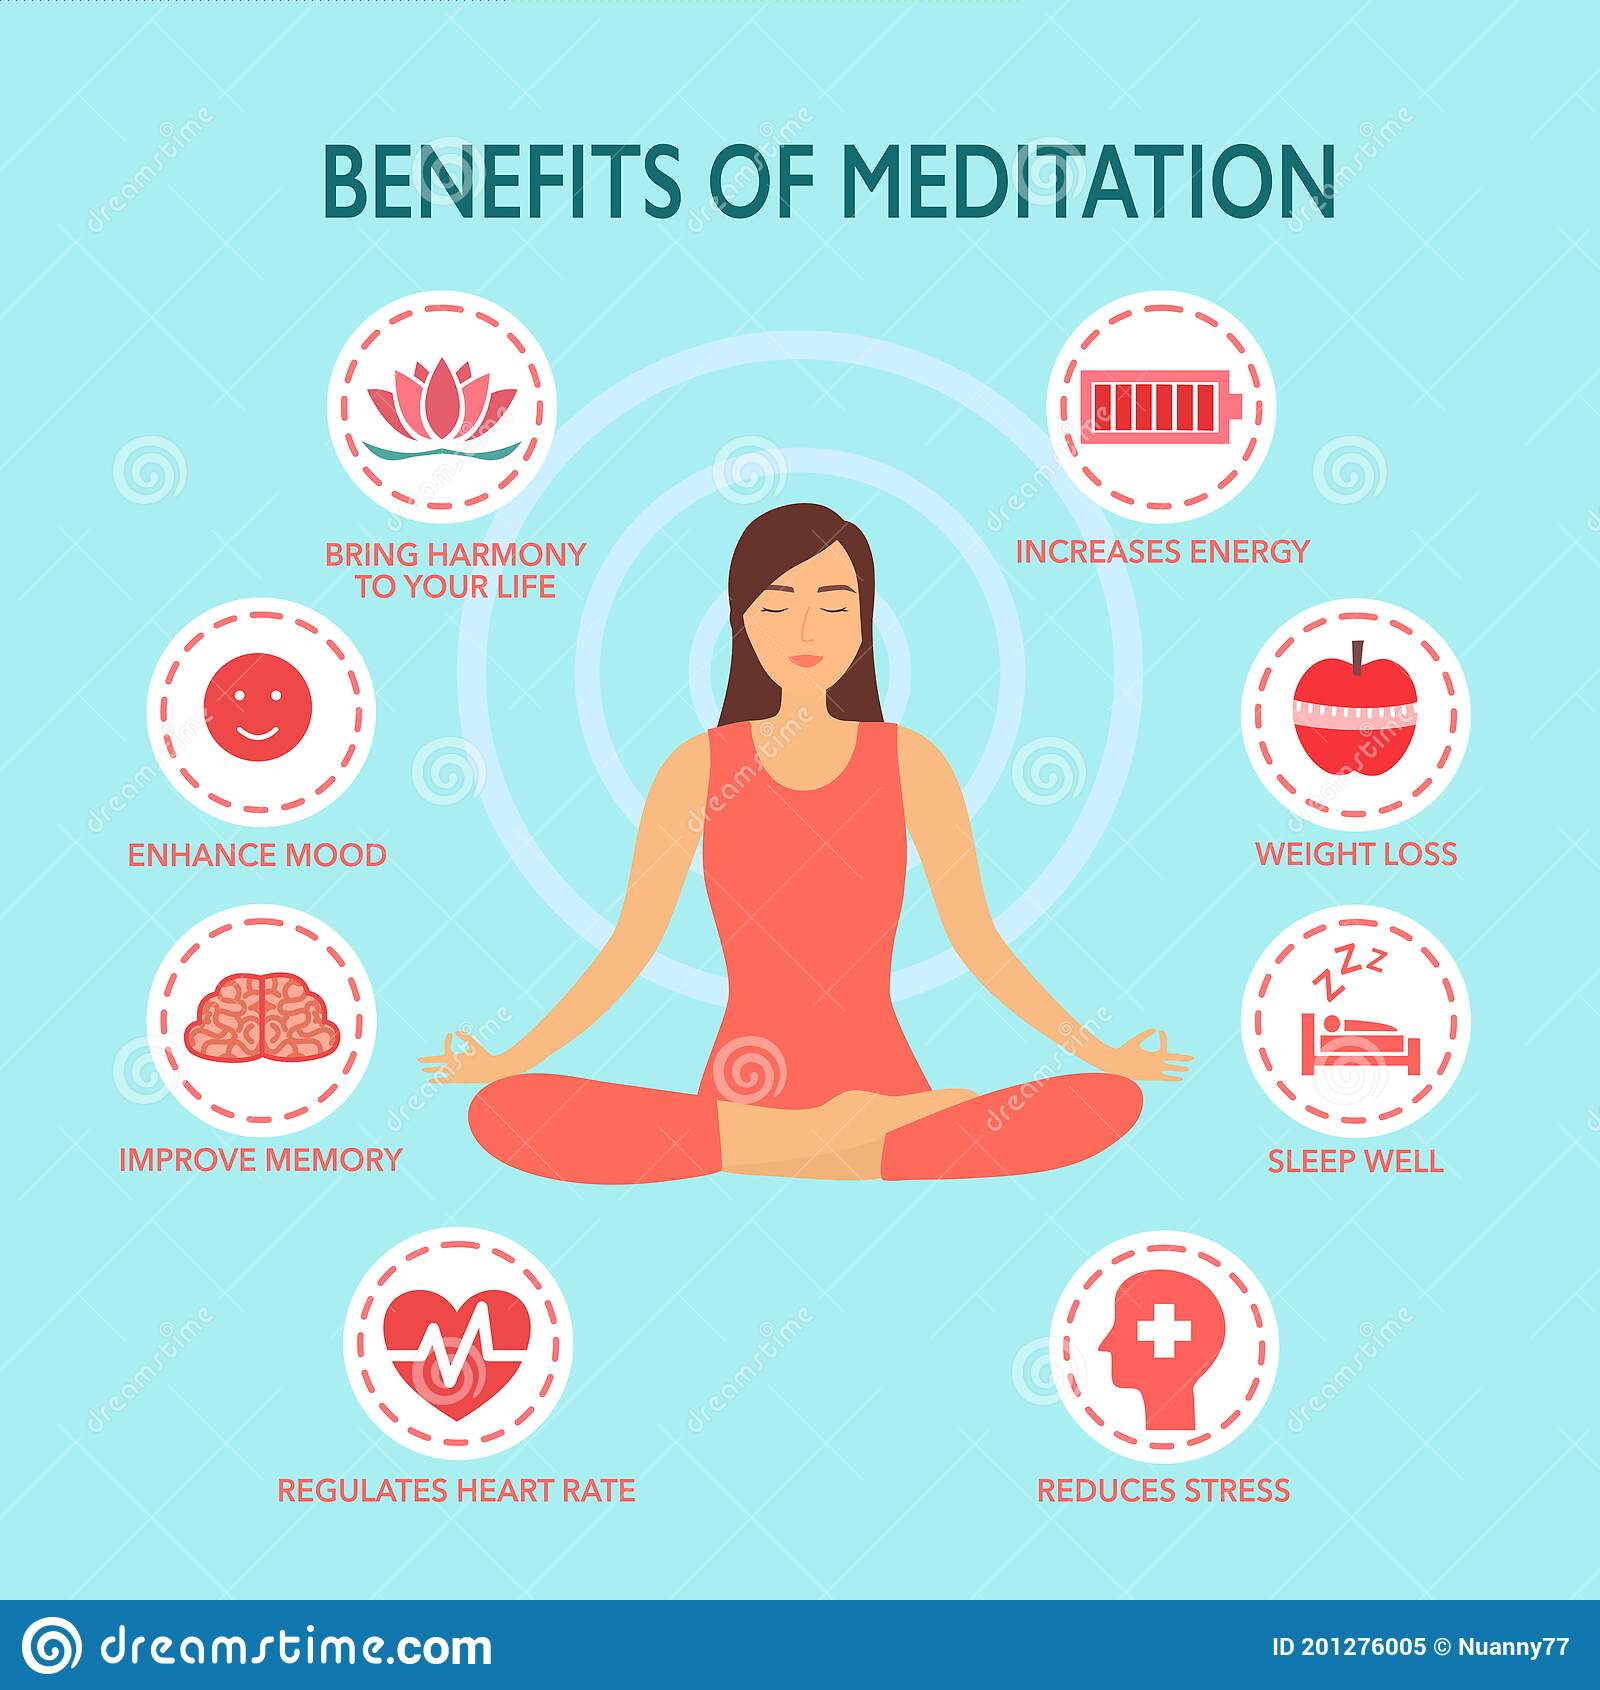 The Benefits of Meditation for Your Health